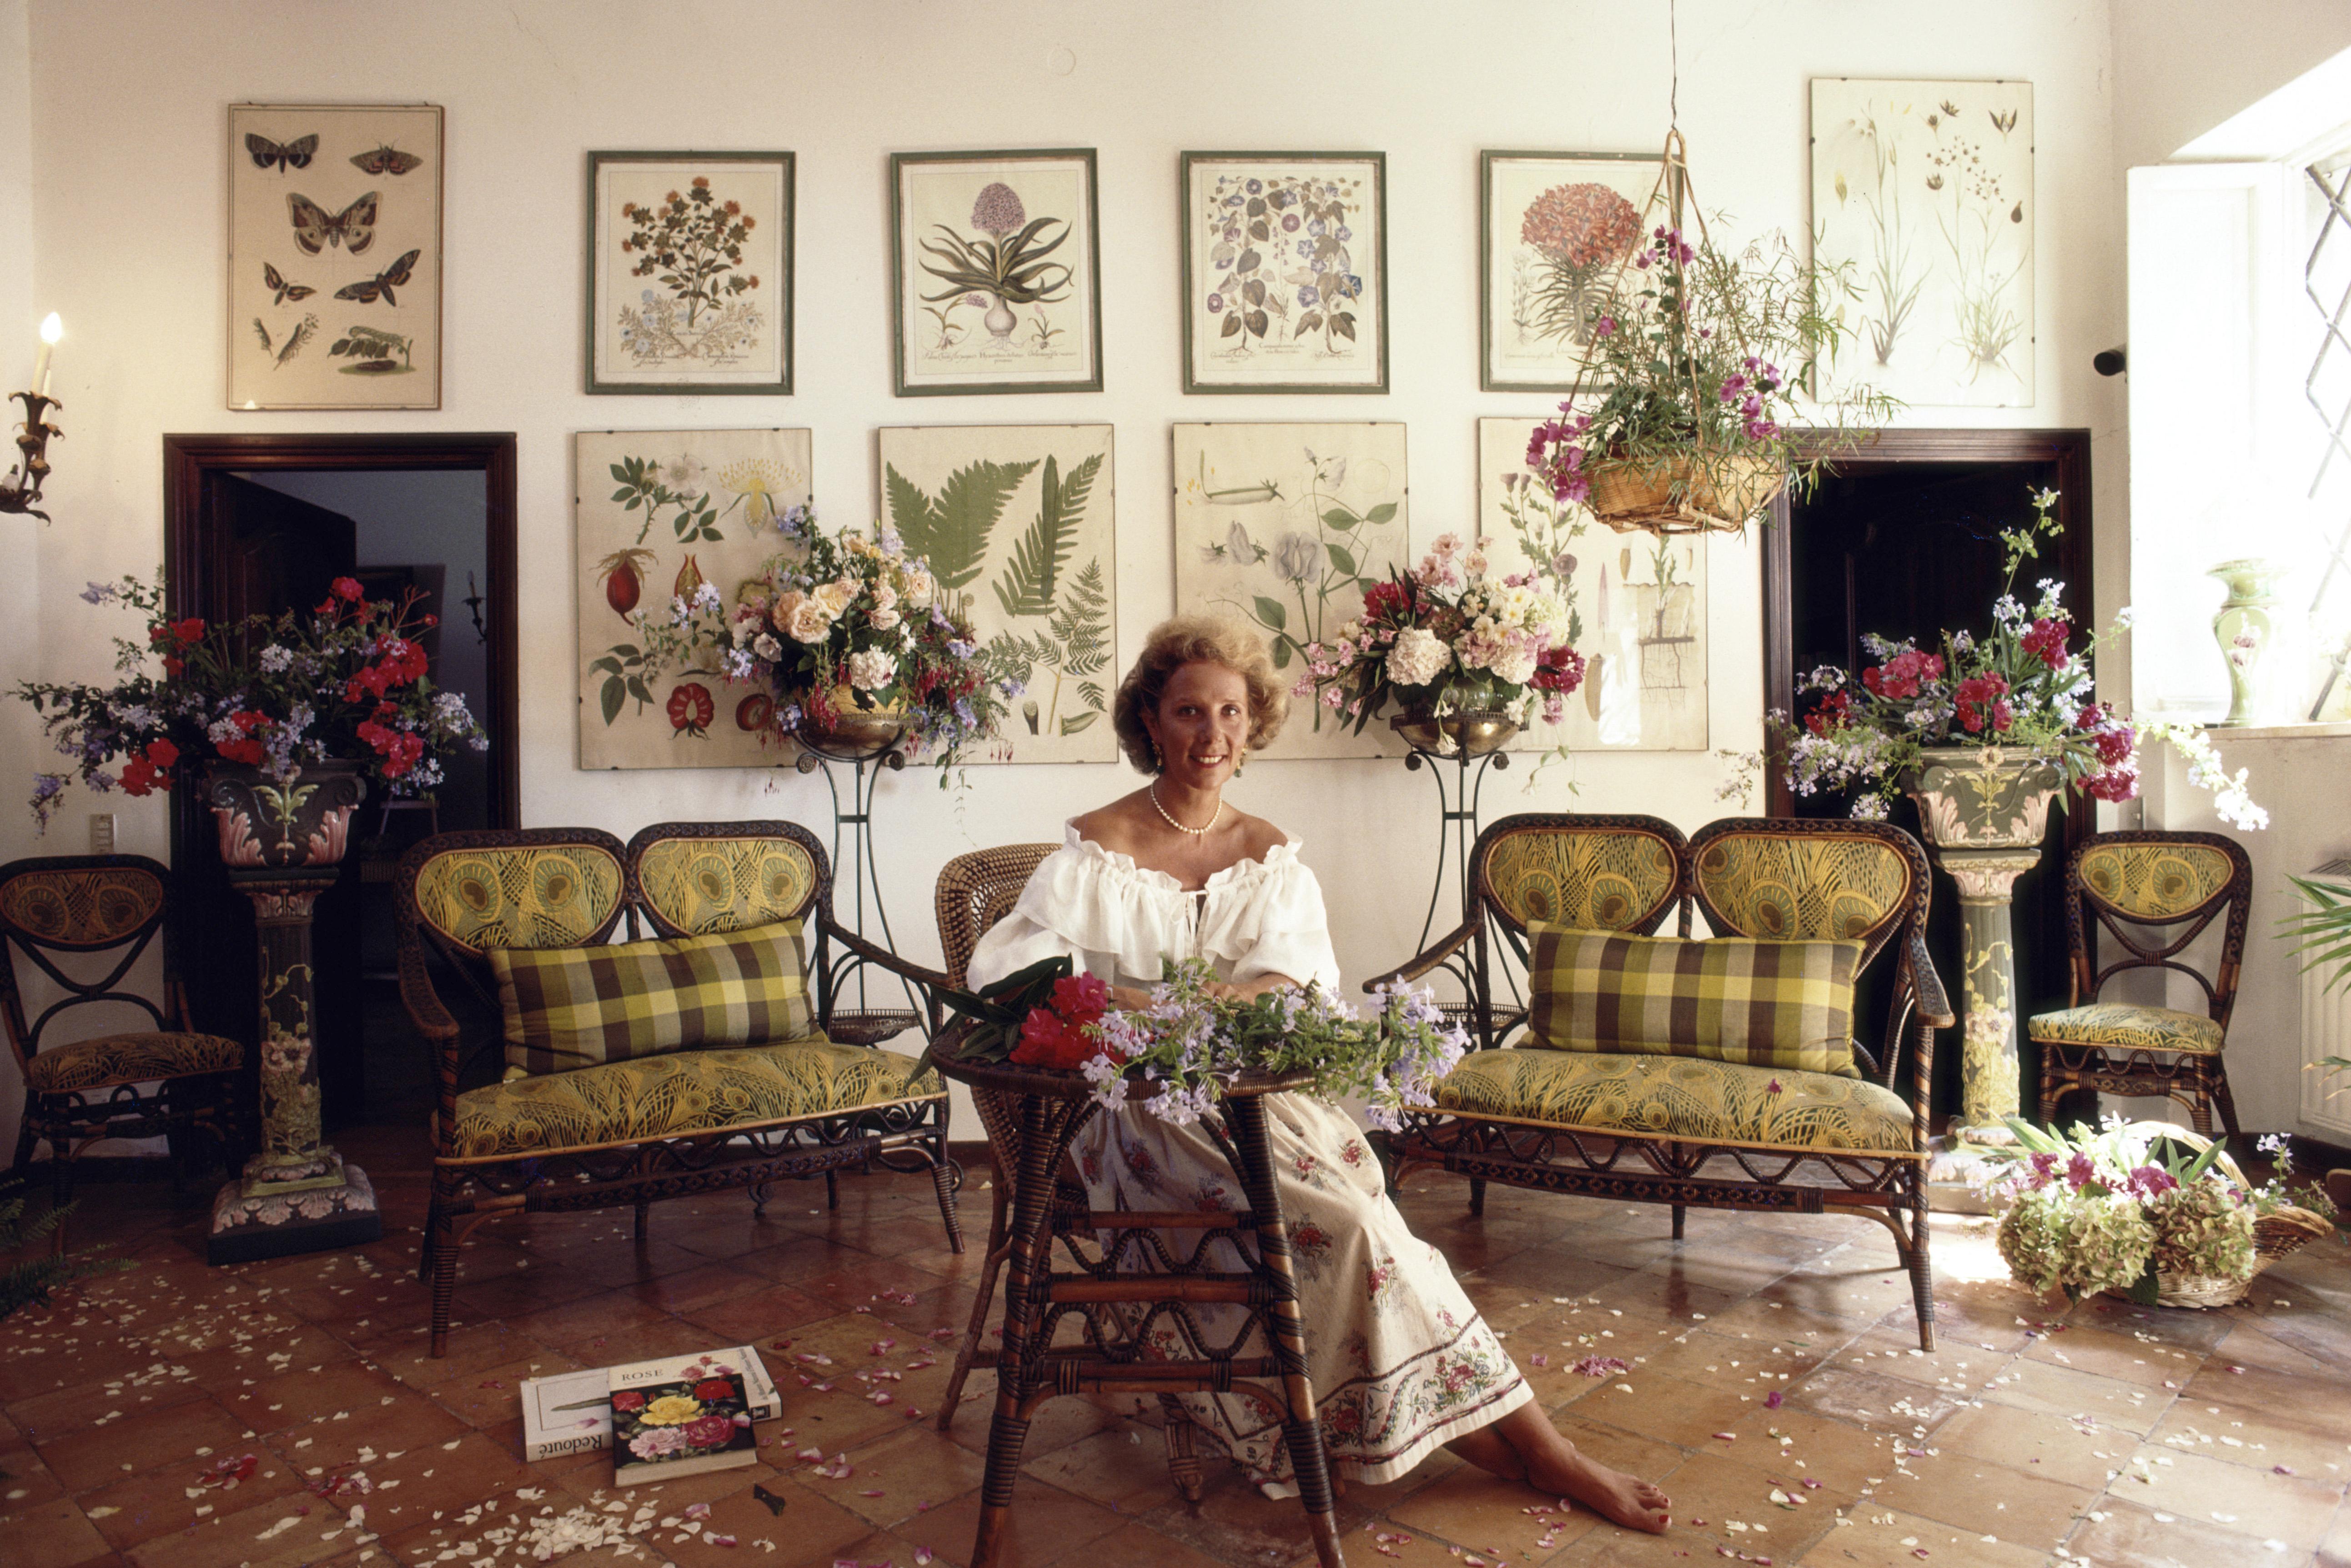 Slim Aarons
Contessa Giuppi Petromarchi
1987
C print
Estate stamped and hand numbered edition of 150 with certificate of authenticity from the estate.   

Contessa Giuppi Petromarchi poses in the garden room at La Ferriera , her family's villa in